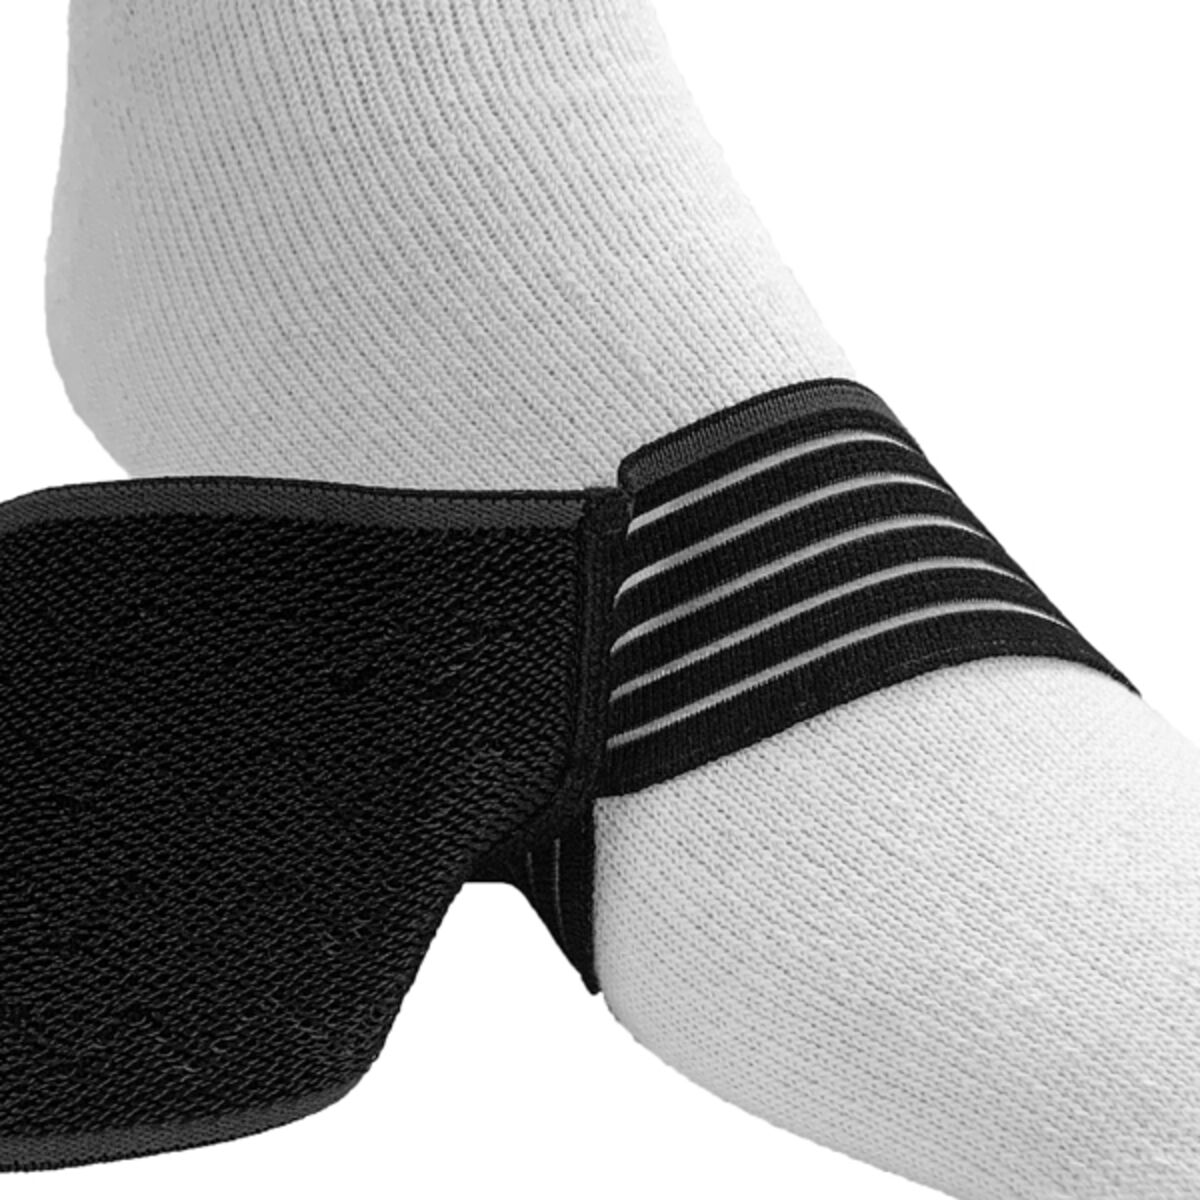 EASYGRIP ANKLE WRAP BLK OSFM | Ankle Braces & Supports | By Body Part ...